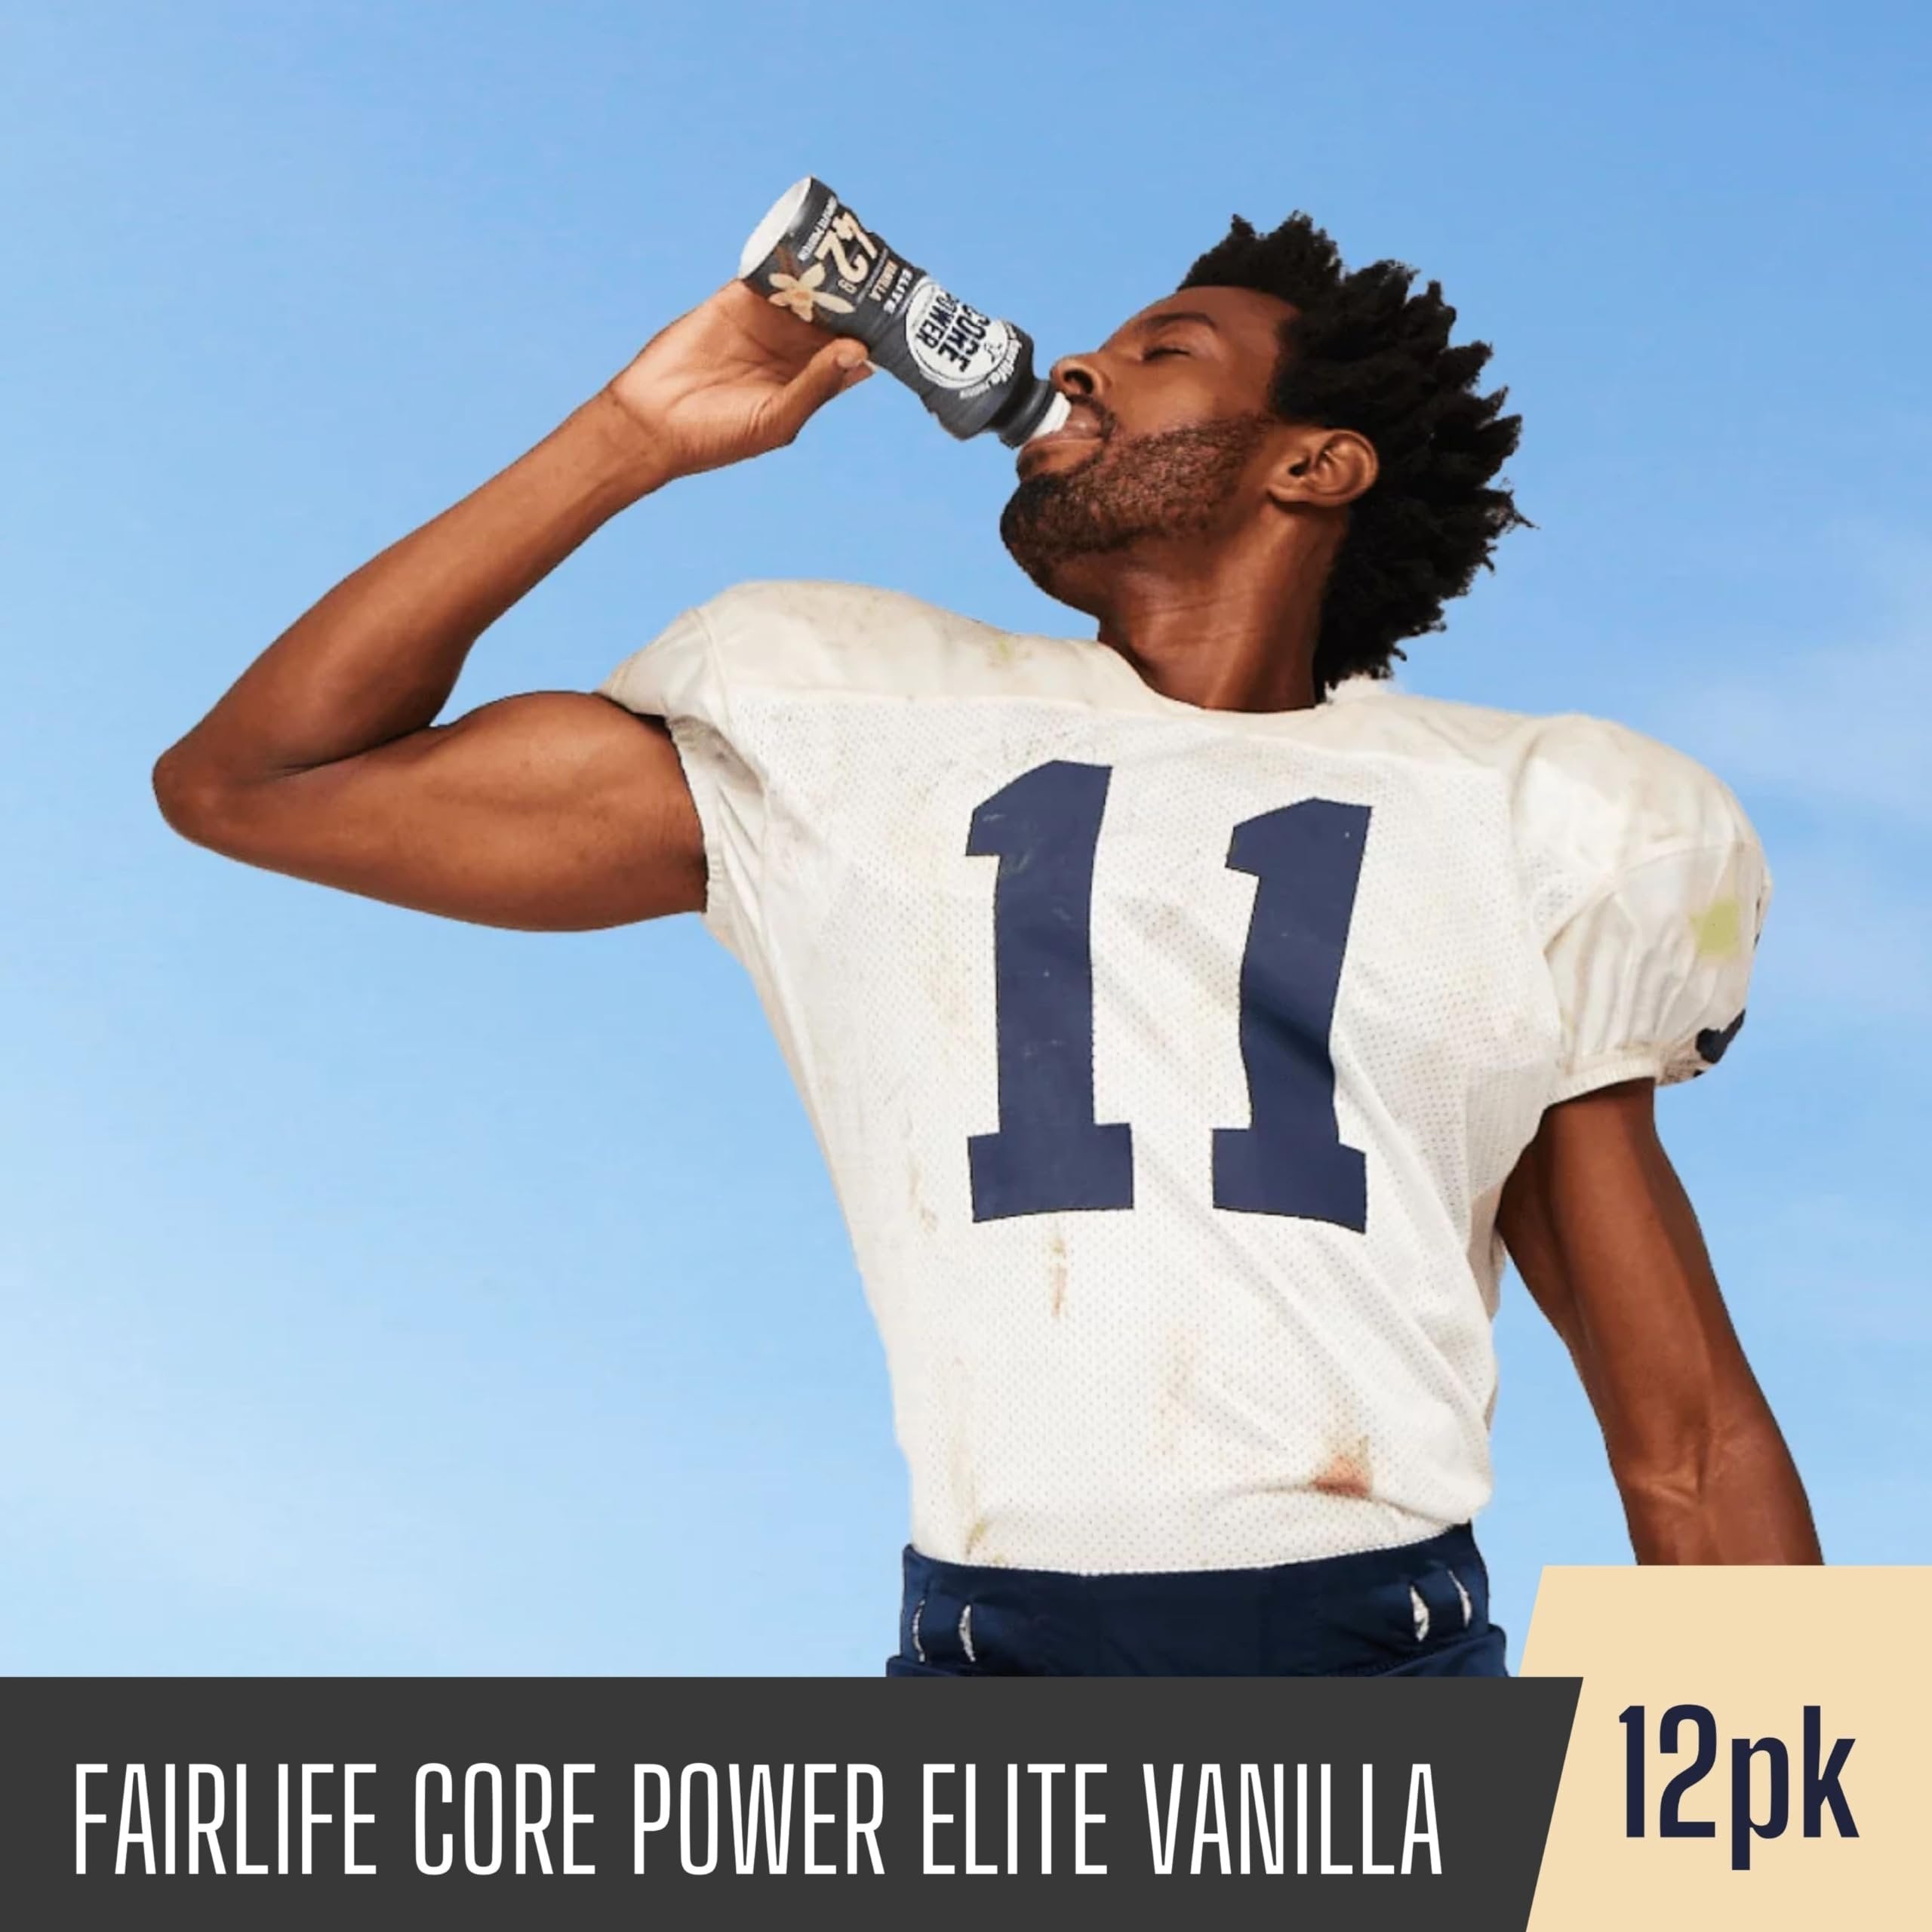 Core Power Fairlife Elite 42g High Protein Milk Shake - Kosher, Vanilla Flavor Protein Shake for Workout Recovery - 14 Fl Oz (Pack of 12) & Multi-Purpose Key Chain